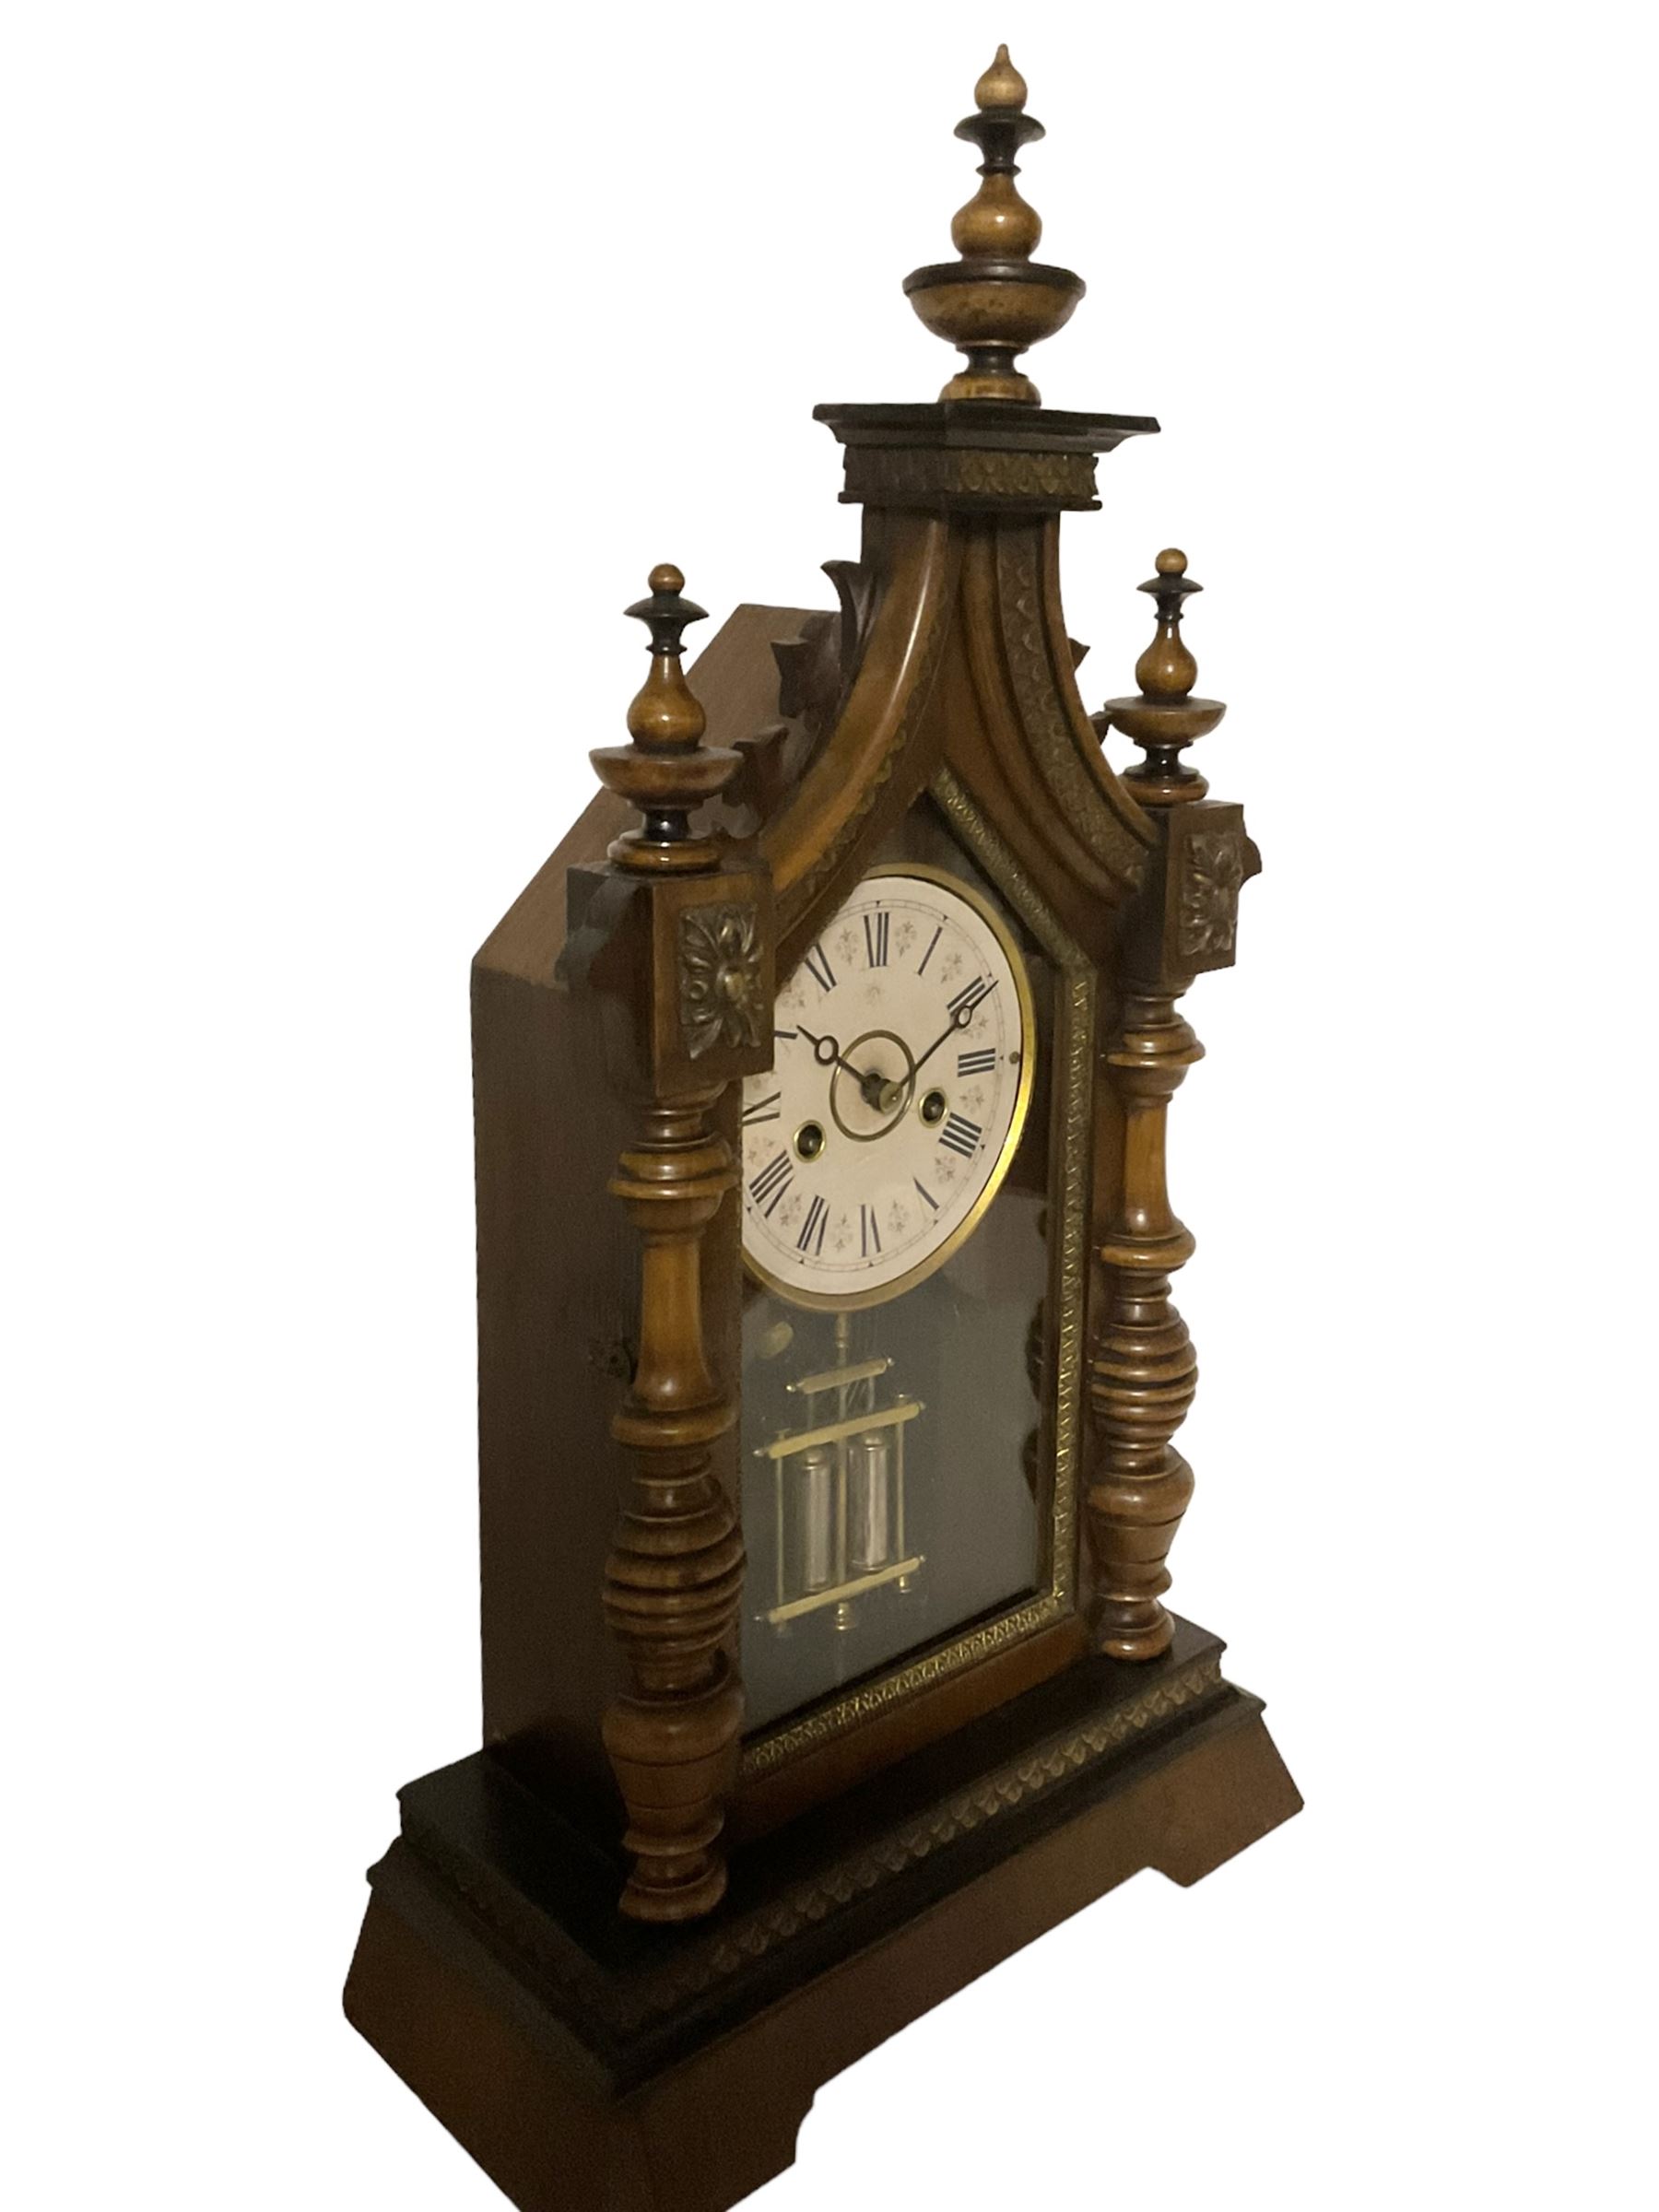 Juhngans - late 19th-century 8-day walnut and ebony mantle clock - Image 2 of 5